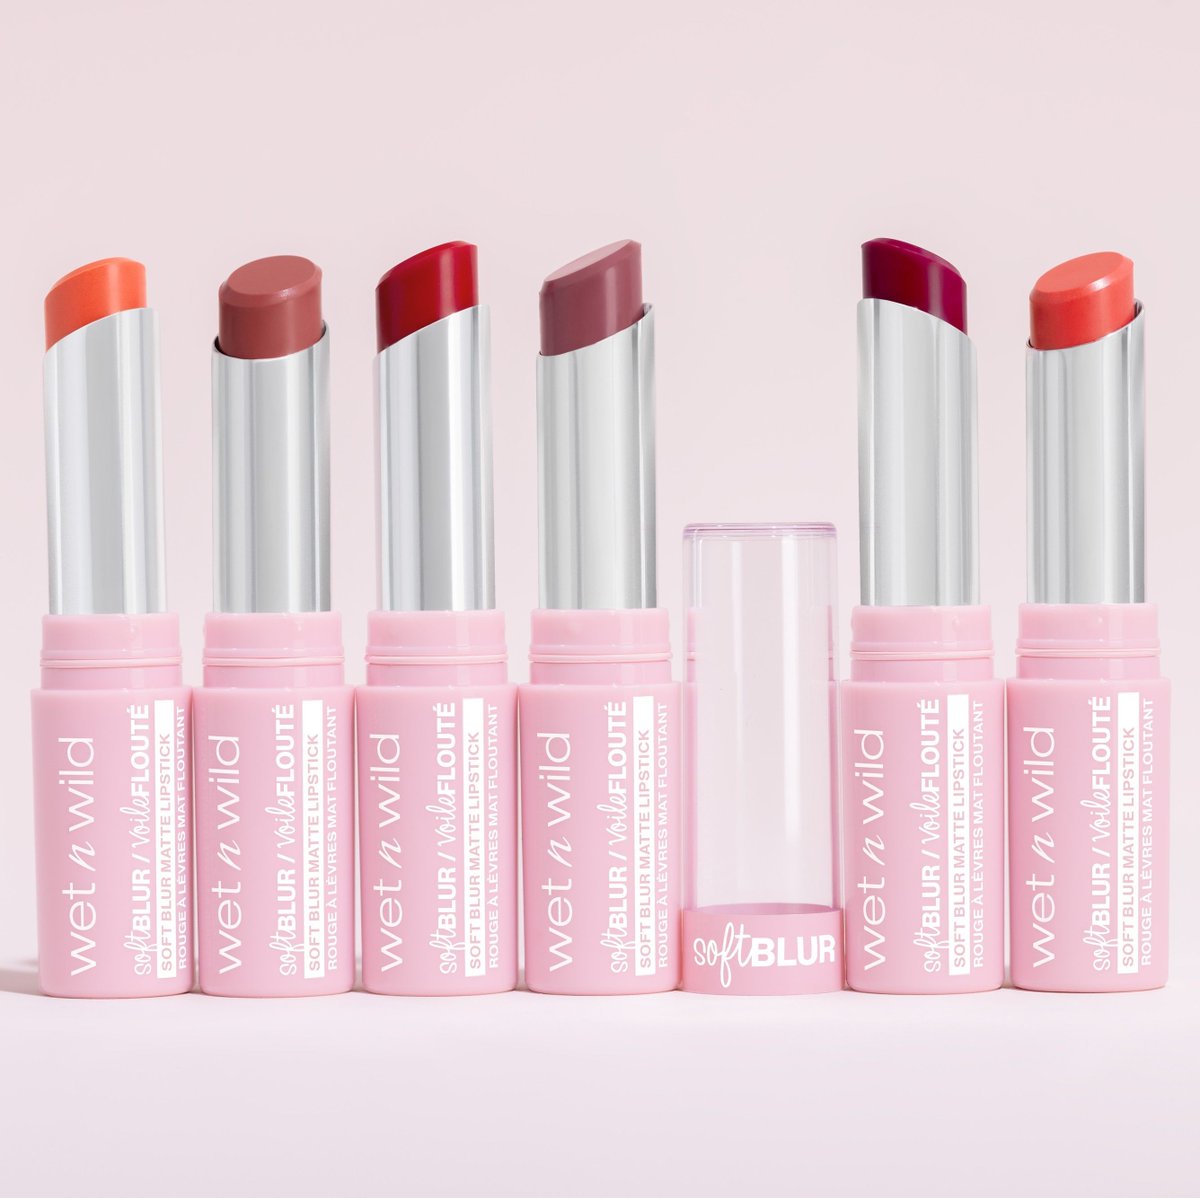 Achieve a spectrum of color with Soft Blur Matte Lipsticks 💄 Start with semi-sheer, soft pigment ➡️ Build to richer color, all with a gorgeous matte finish.⁠ ⁠ Get them @target @walgreens @cvspharmacy and shop our #Amazon store at #LinkInBio #wetnwildbeauty #crueltyfree